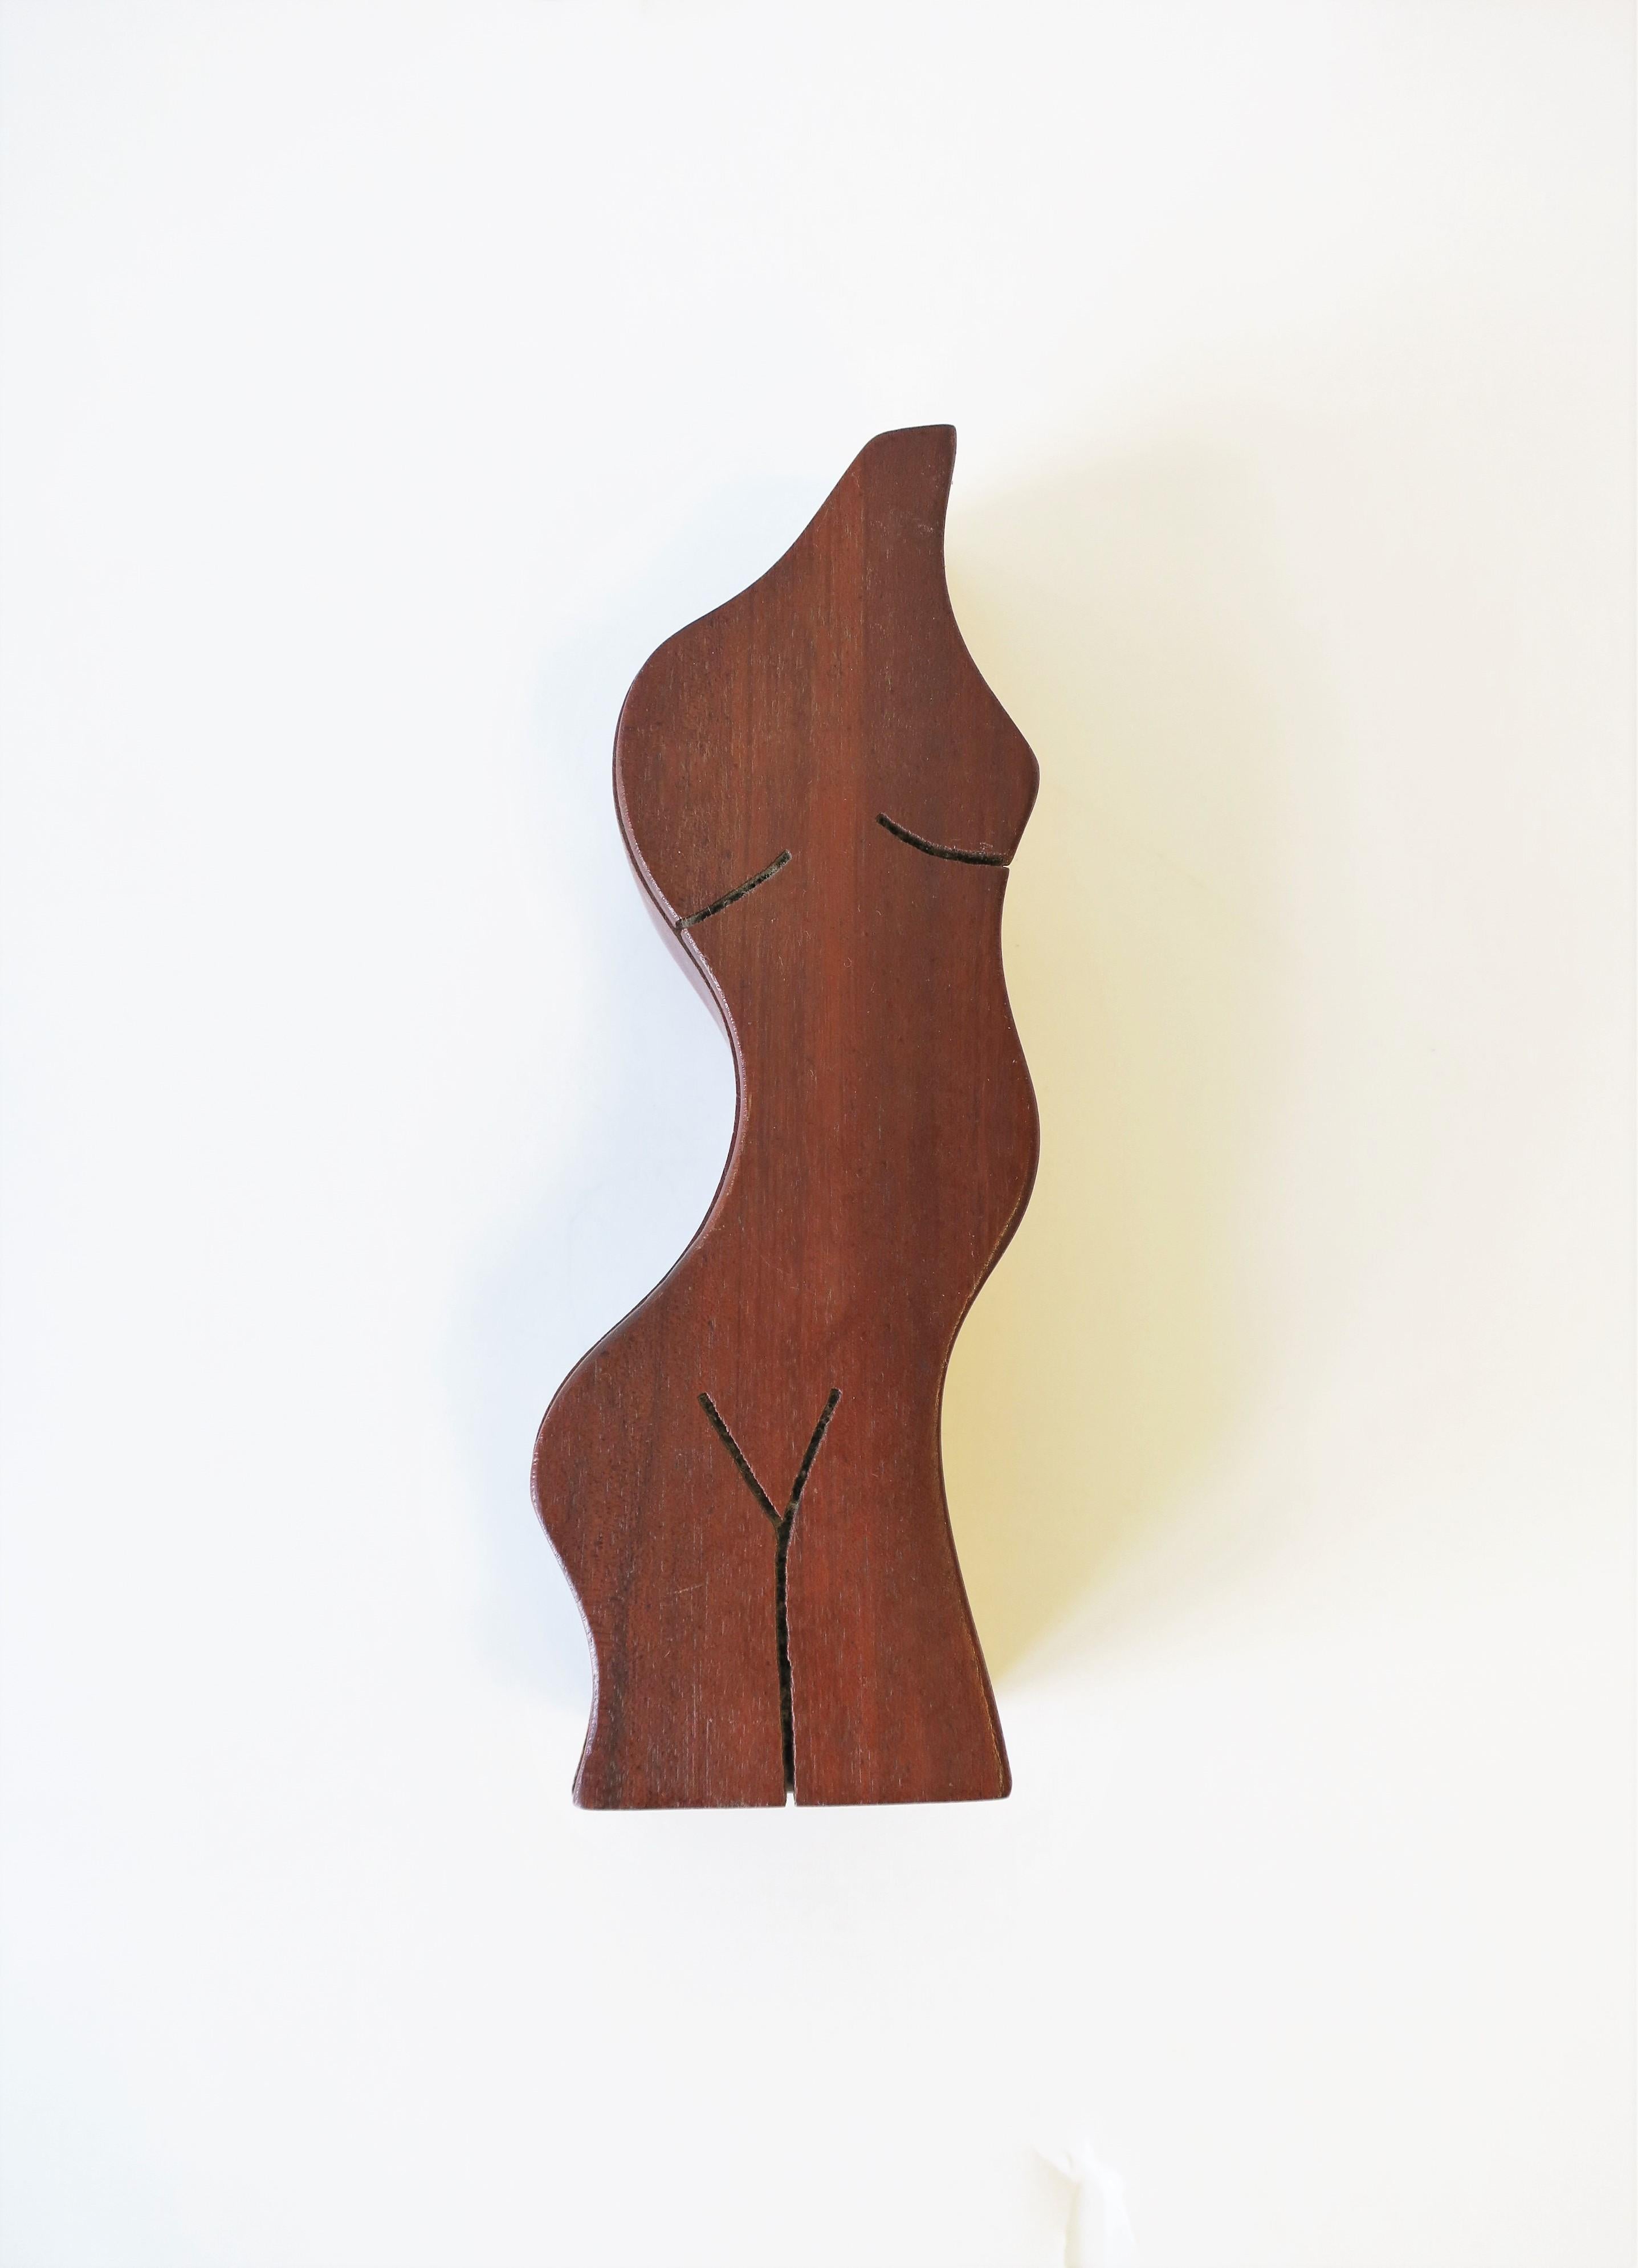 A beautiful shapely figurative wood box with female torso. Box works well as a standalone decorative piece, or can be used to hold jewelry or small items on a desk, vanity, console, or other area. Piece demonstrated as a jewelry box in images #5, 6,